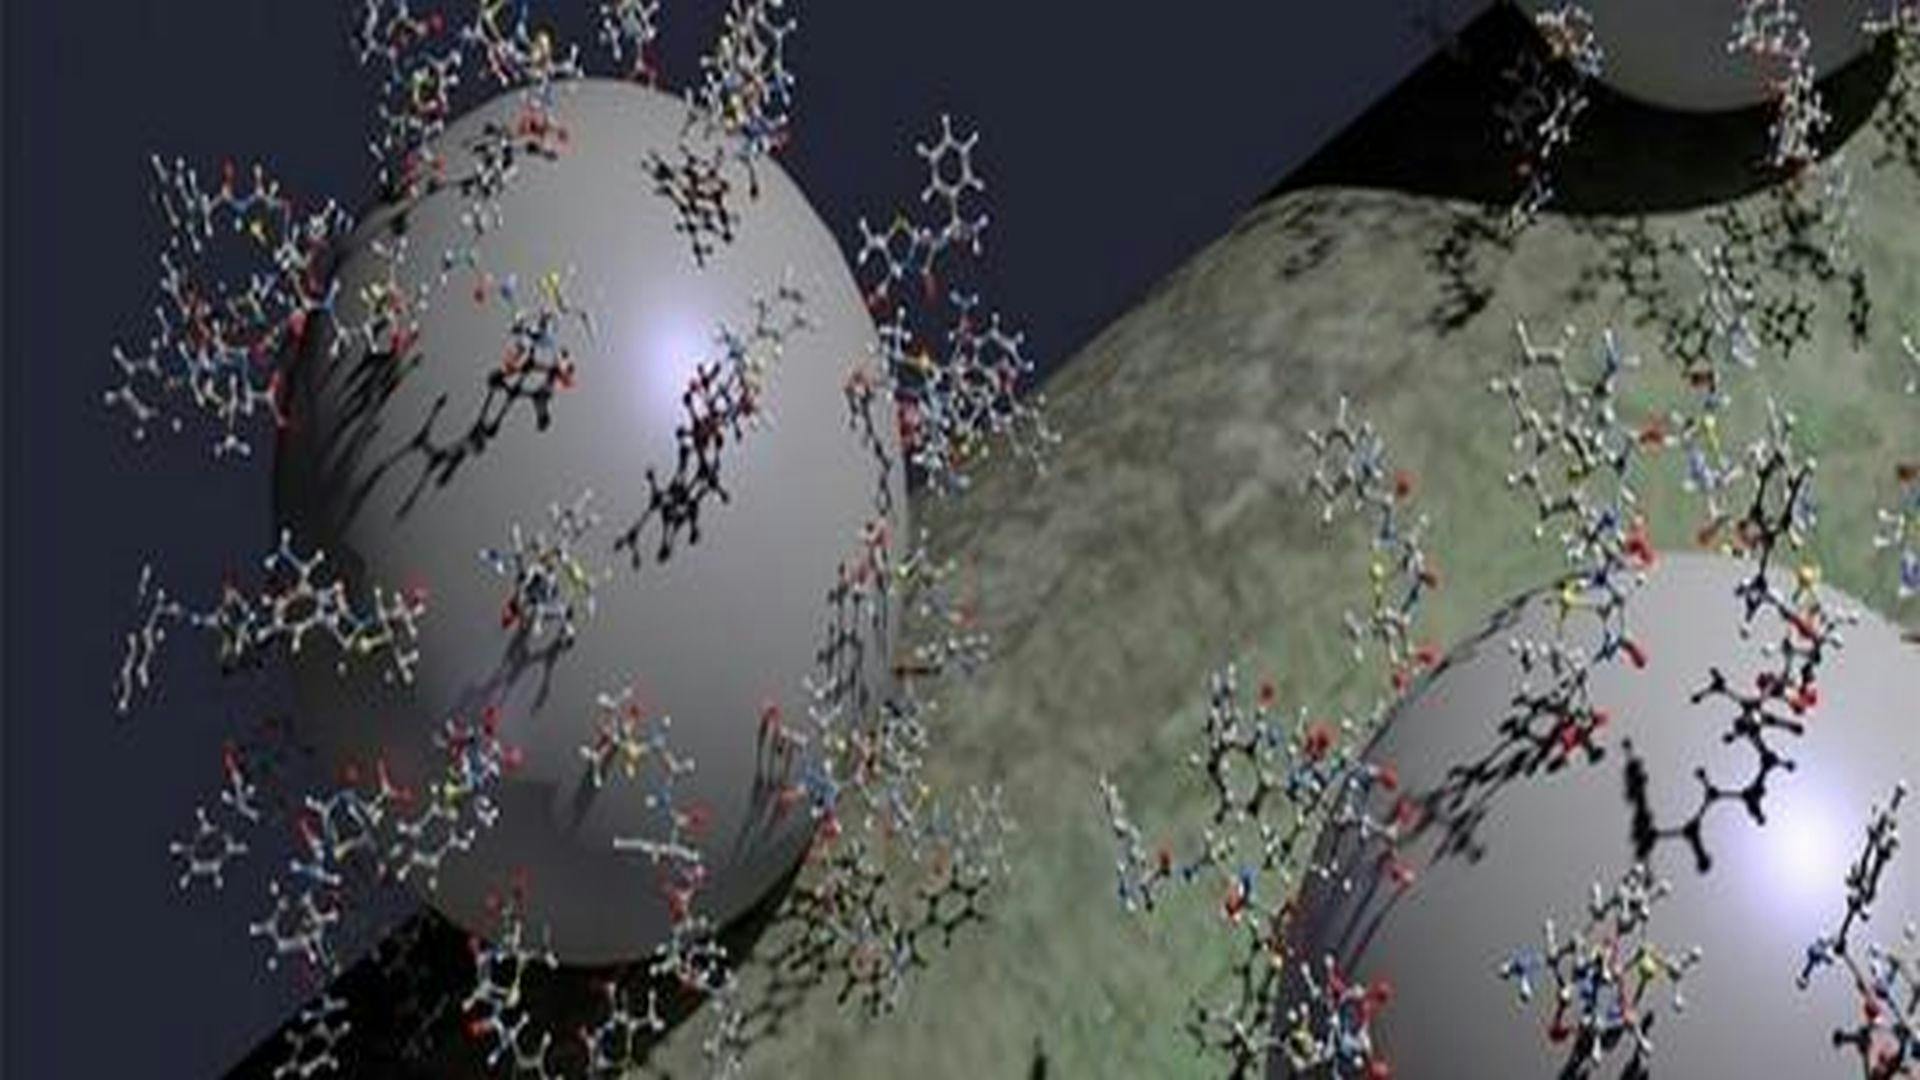 Nanoparticles Coated With Antibiotic Eliminate Drug-Resistant Bacteria